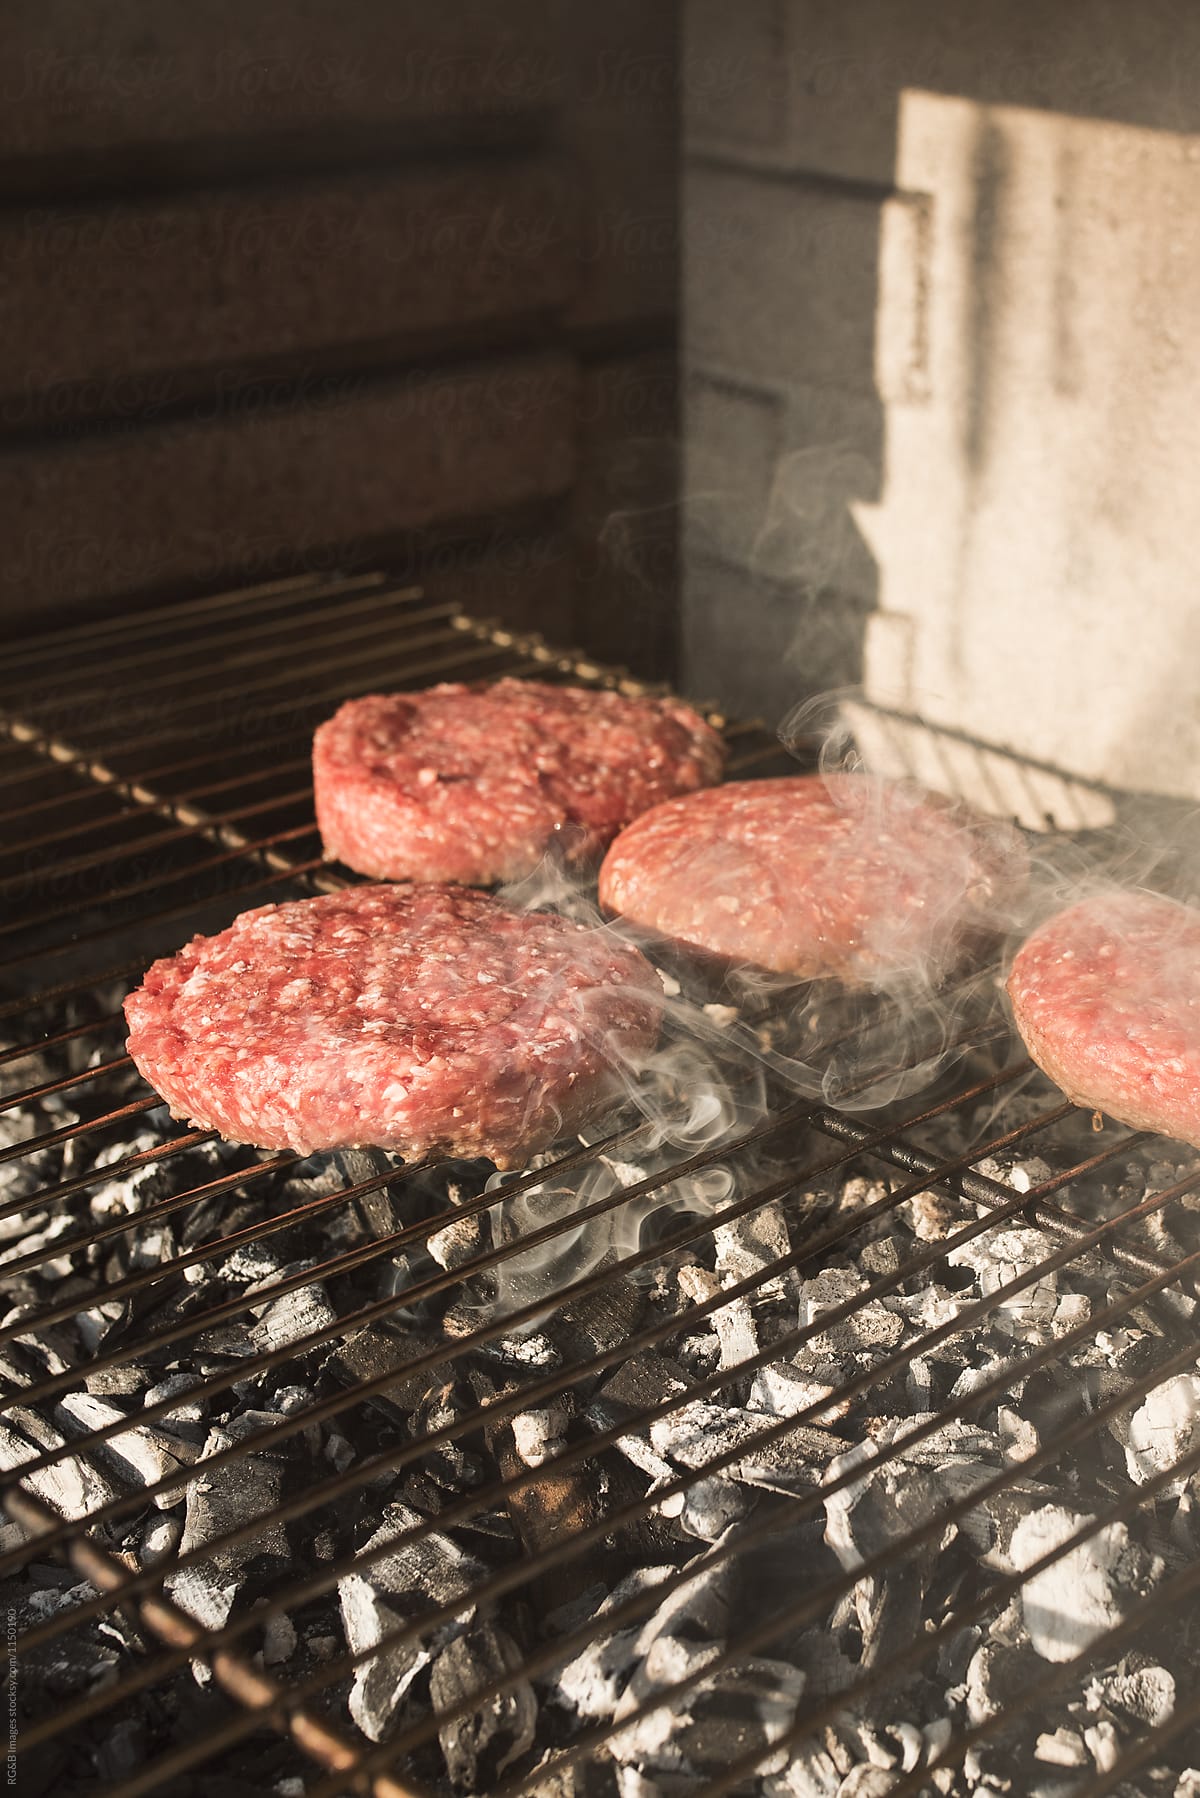 Meat burgers getting cooked on the grill outdoor